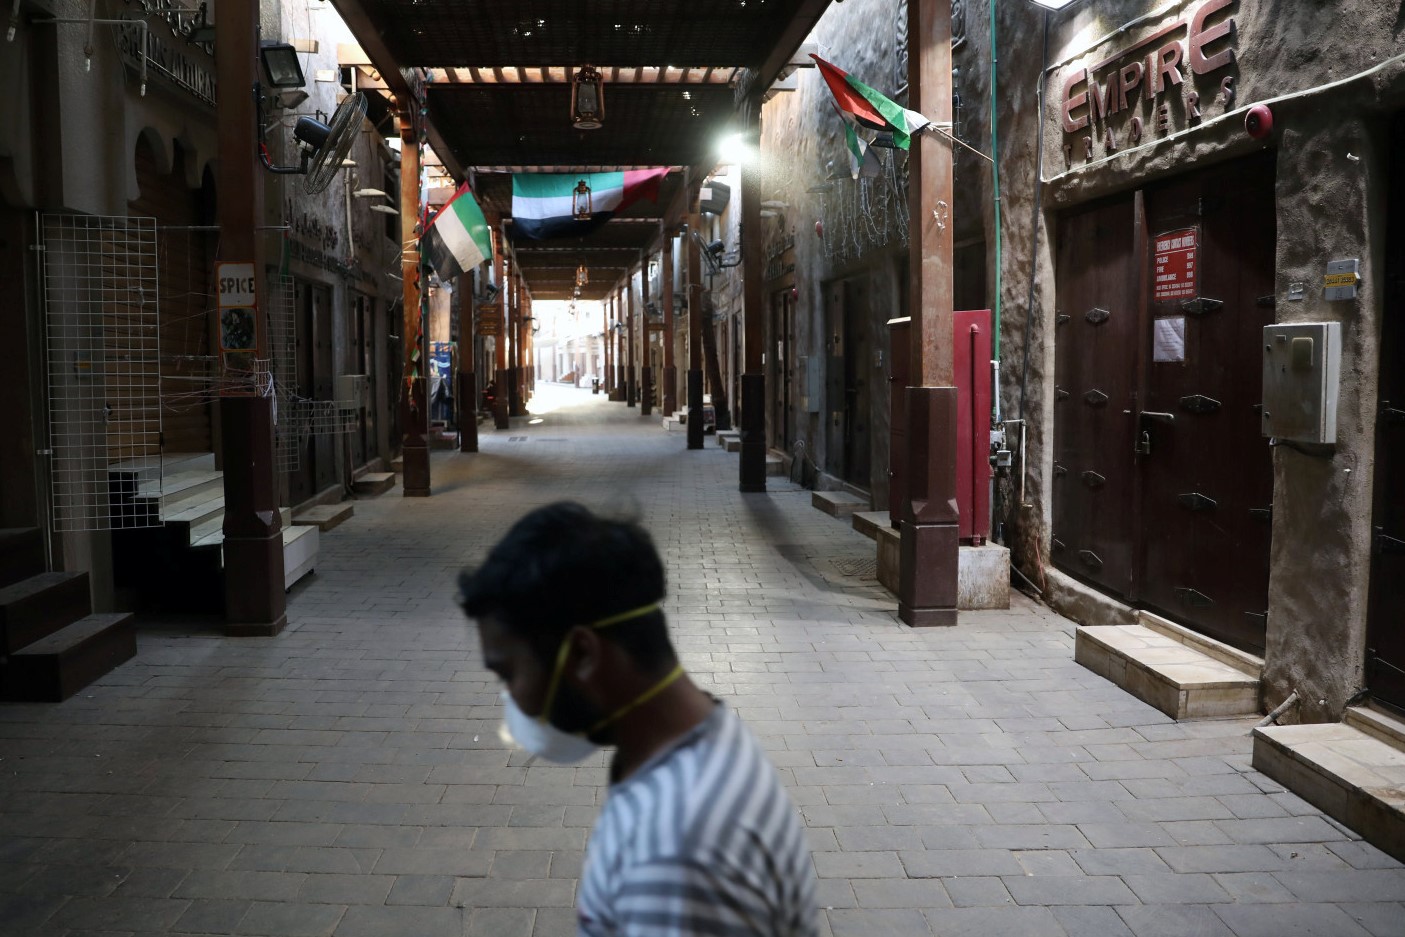 A man wearing a protective face mask walks through the deserted Barajeel Souq, following the outbreak of the coronavirus disease (COVID-19), in old Dubai, United Arab Emirates, March 31